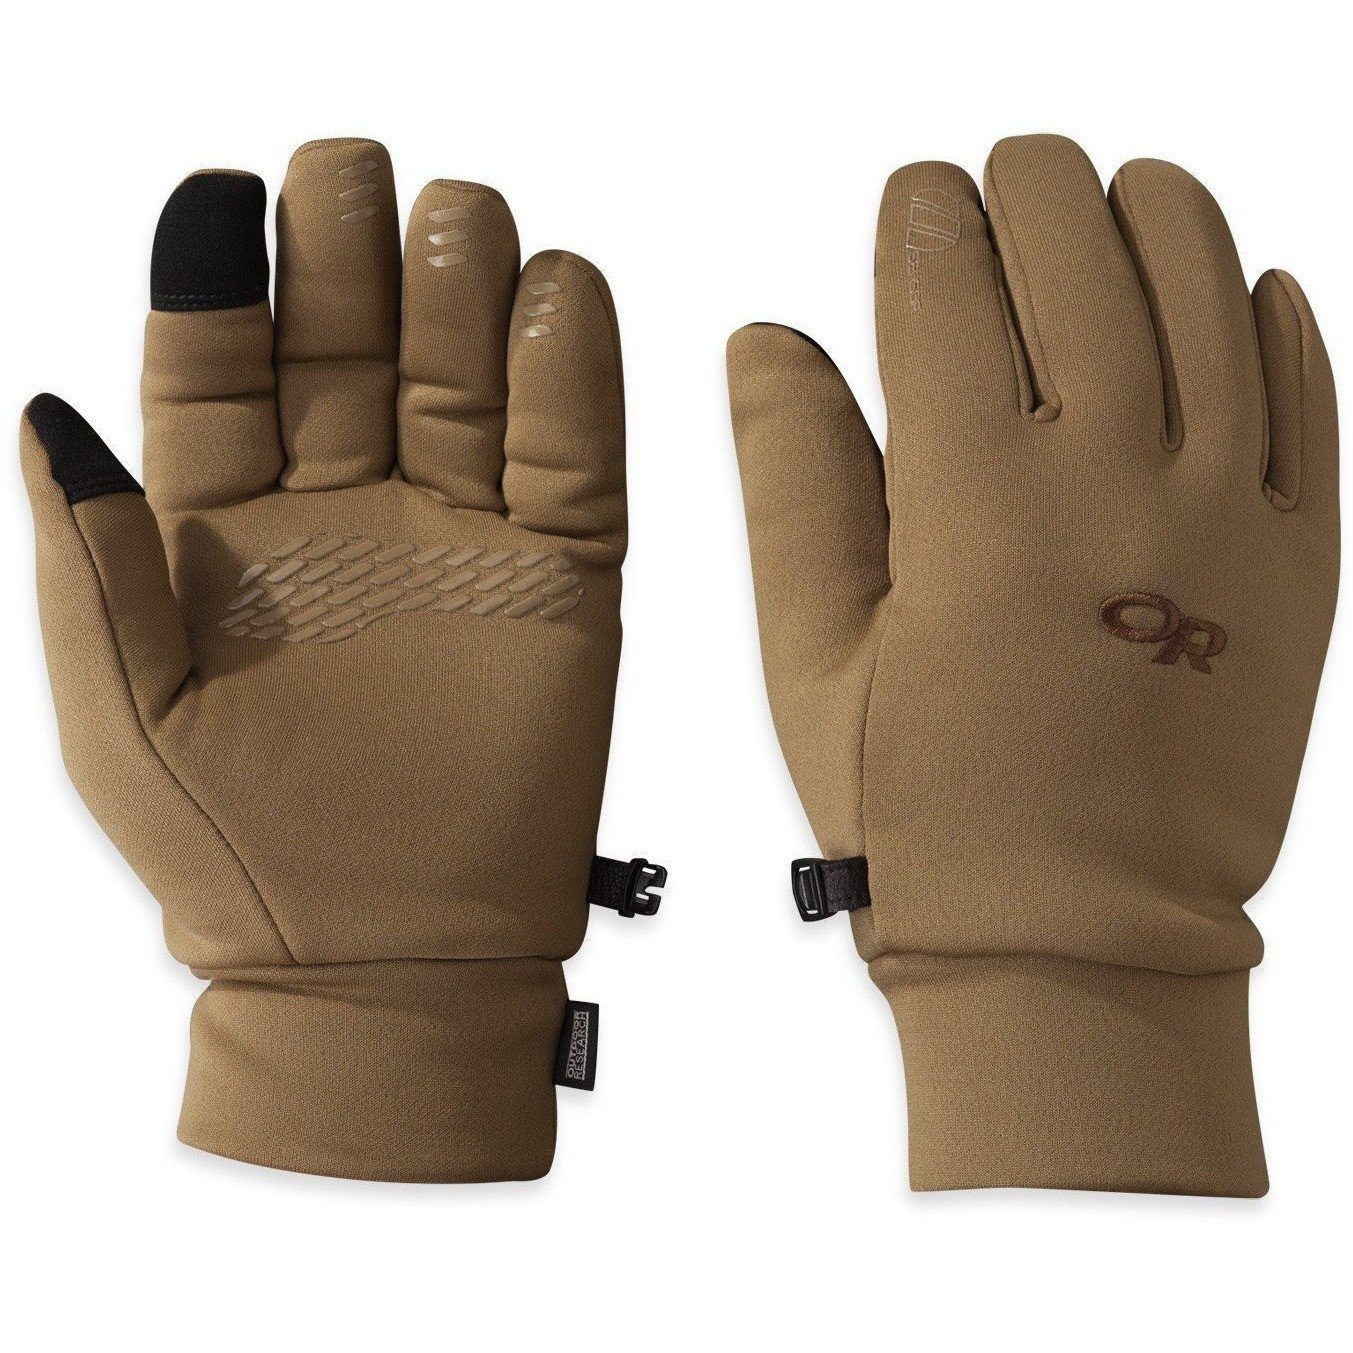 Outdoor Research PL 400 Sensor Gloves - Coyote / Large